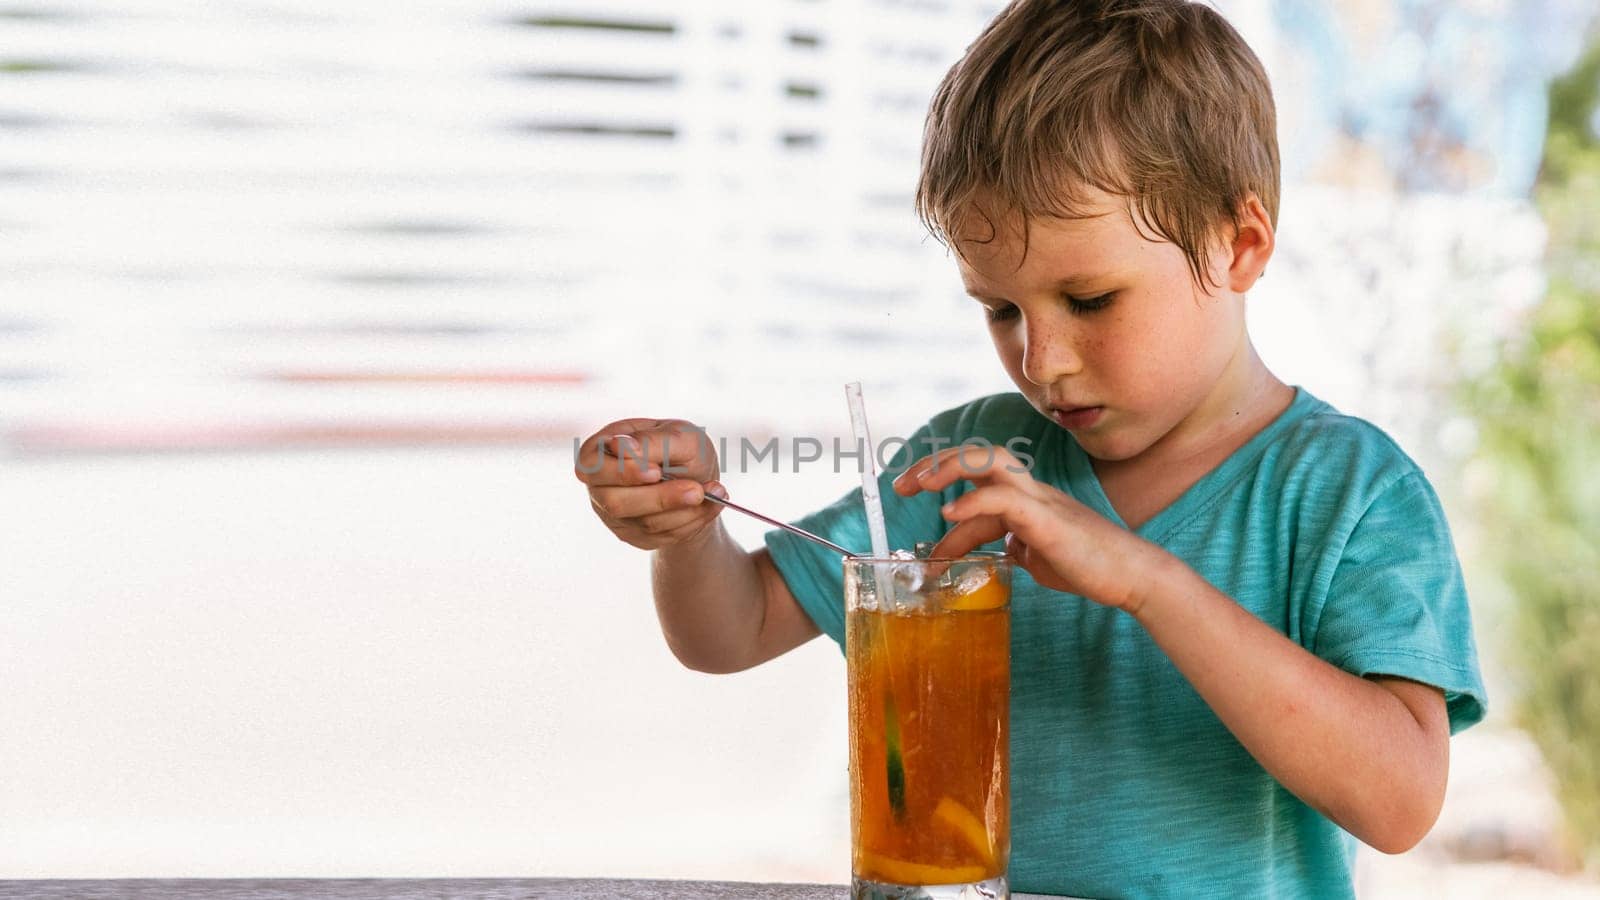 Happy childhood. Boy drinking fruit tea with ice in hot summer day time. Cute lover of sweets and tasty things.